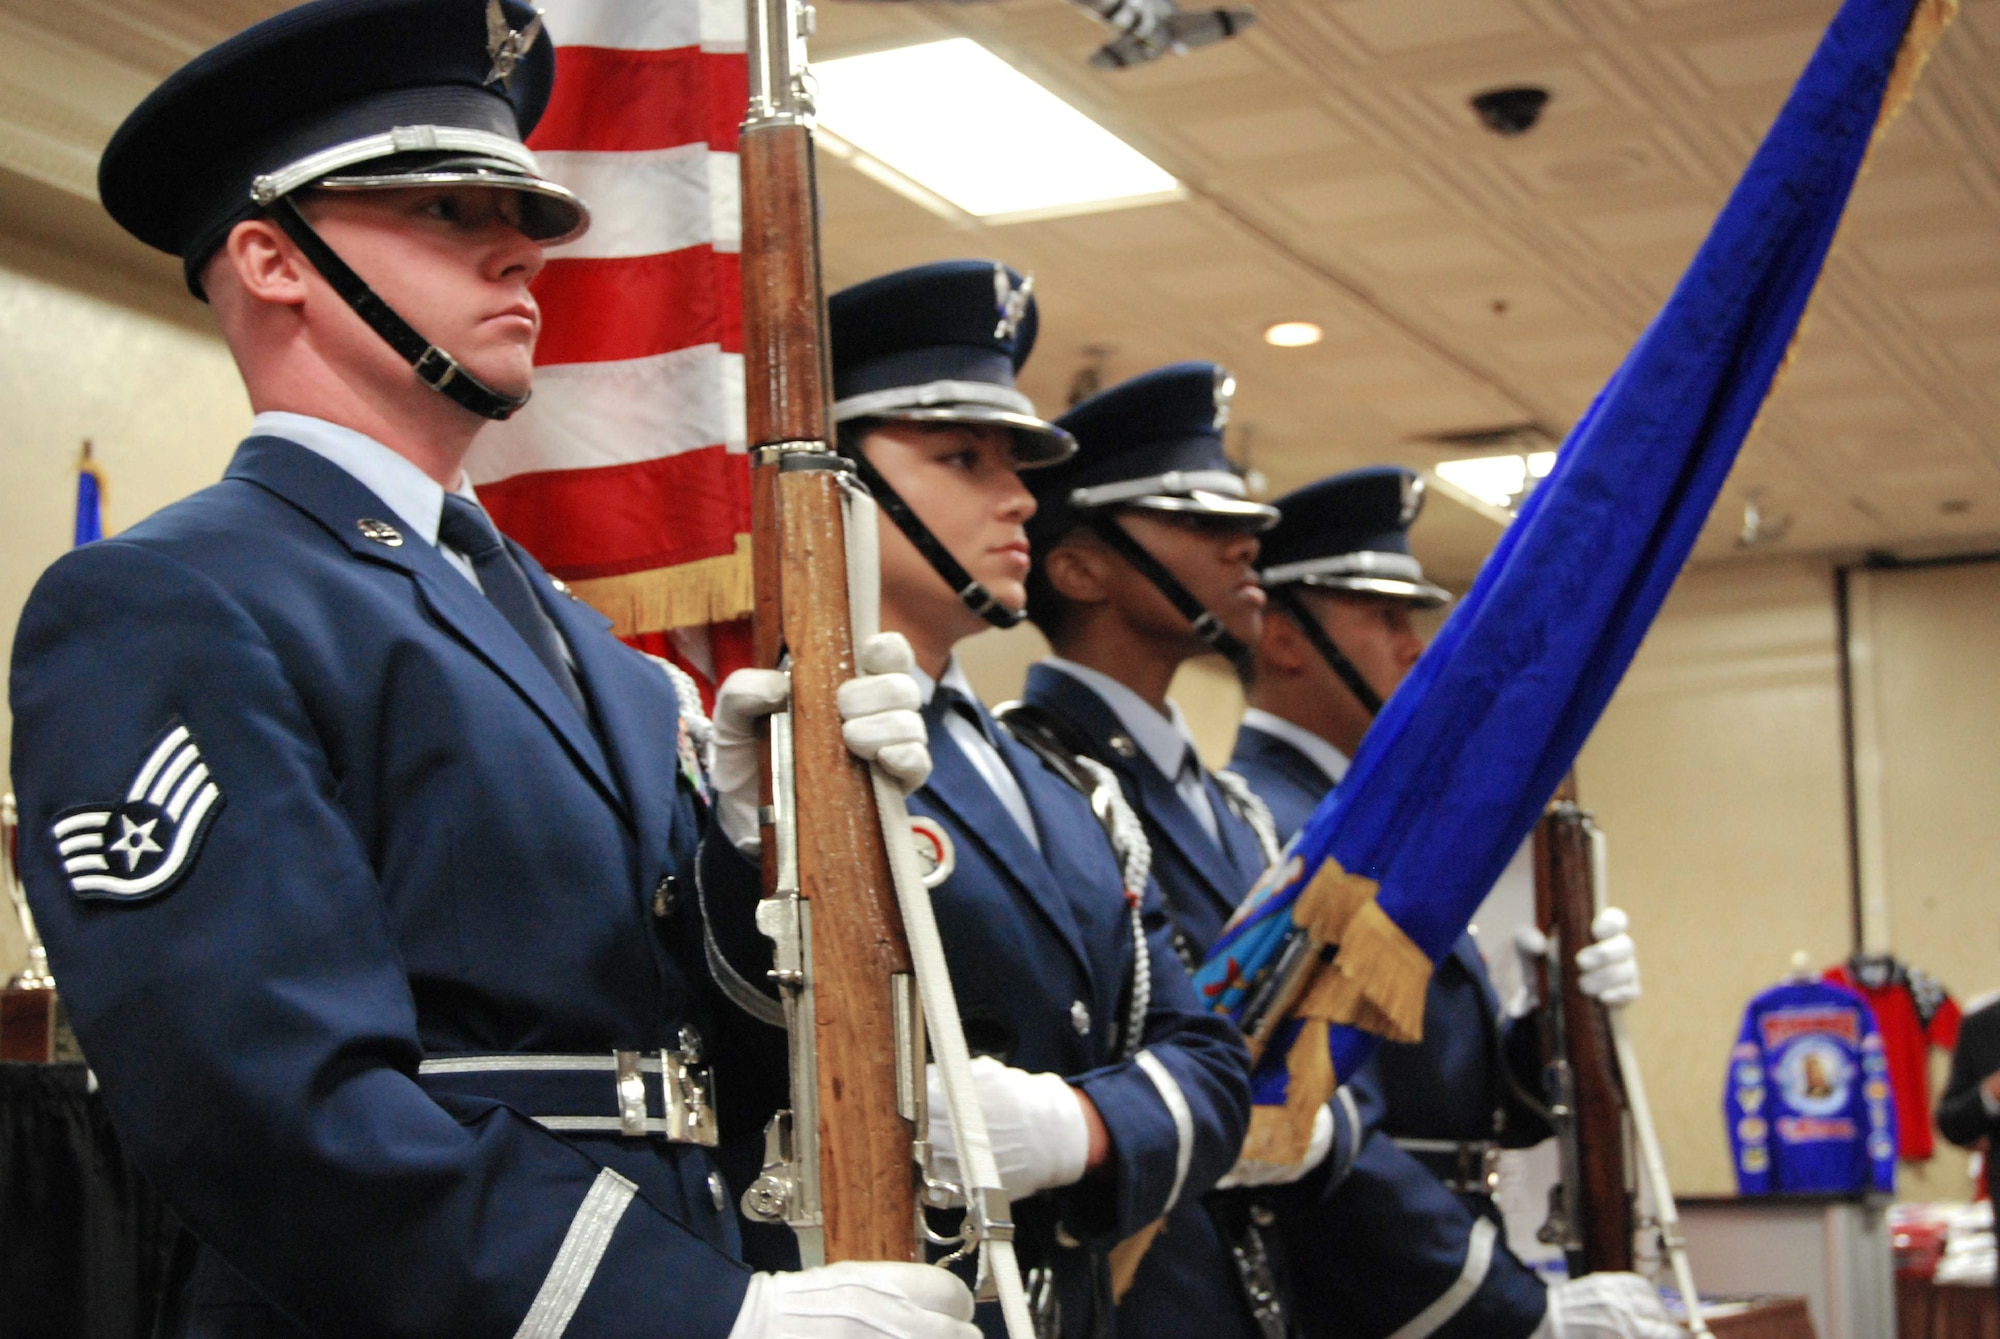 Nellis Air Force Base Honor Guard members post the colors during the Top Guns award ceremony Aug. 6 at the Palace Station Hotel in Las Vegas. The ceremony was part of the 38th Annual Tuskegee Airman Inc. National Convention Aug. 6 through 9. (U.S. Air Force photo/Tech. Sgt. Amaani Lyle)